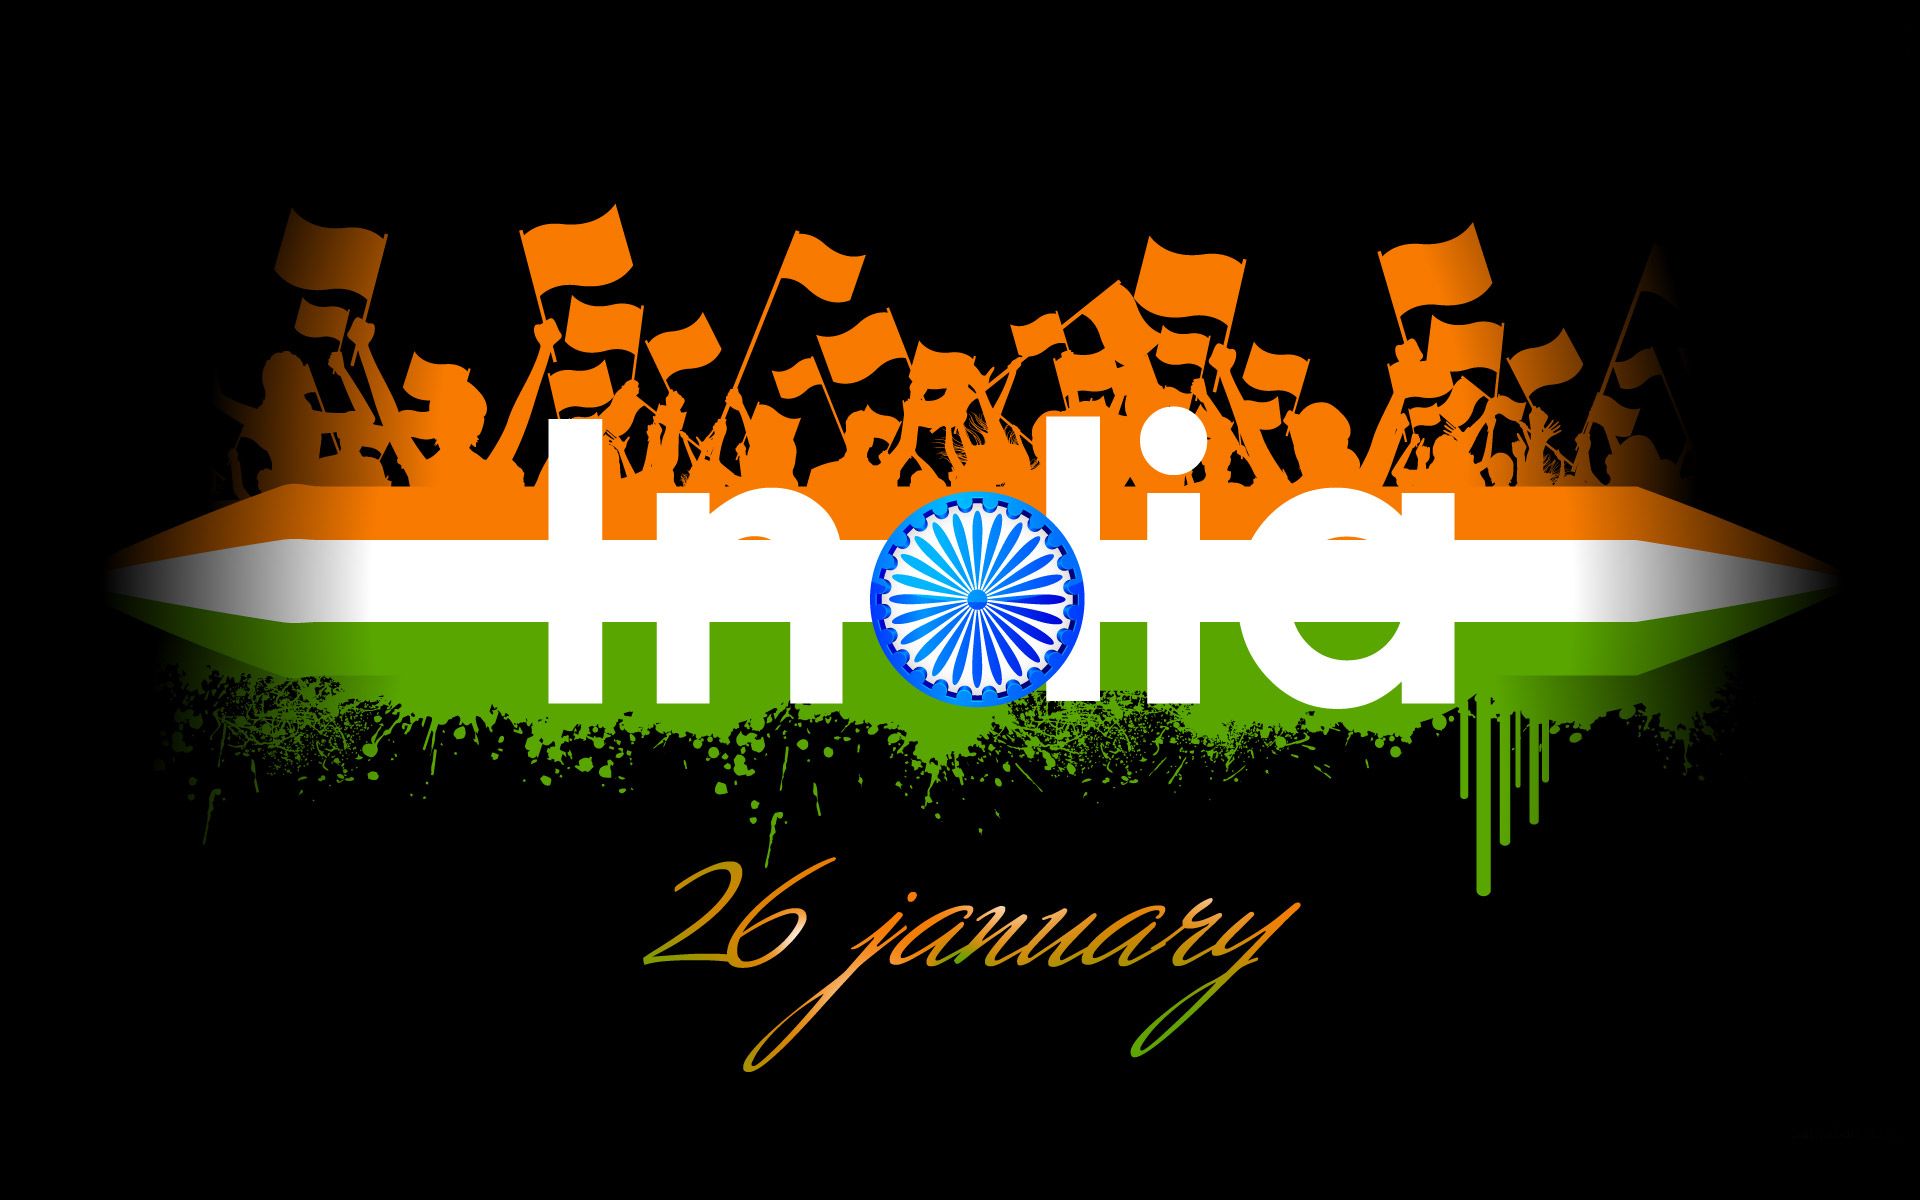 Jan) Happy 71st Republic Day Wishes Quotes Whatsapp Status Dp India Flag Image 2020